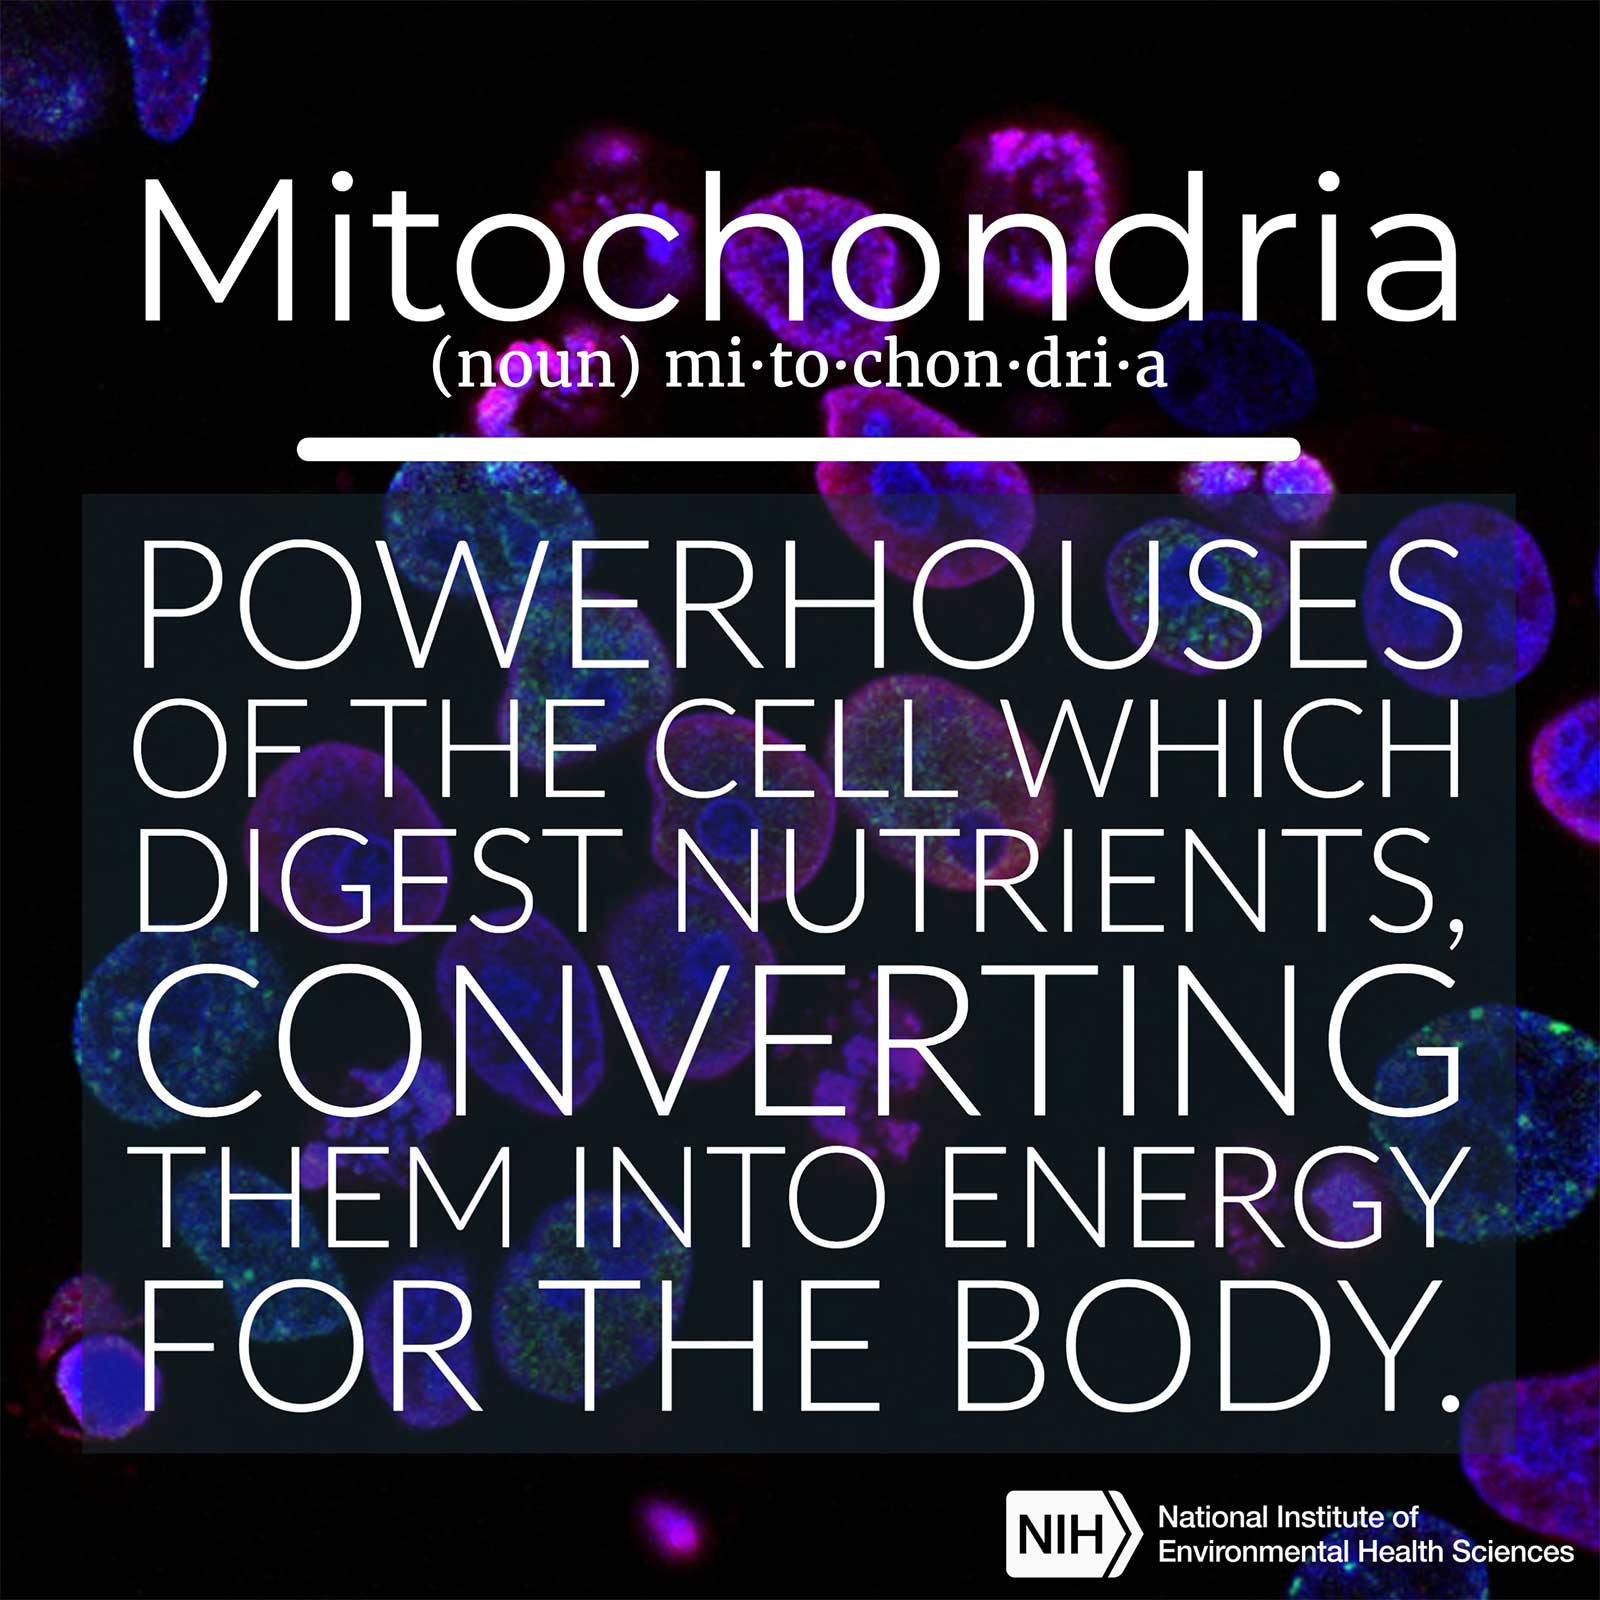 Mitochondria (noun) defined as 'powerhouses of the cell which digest nutrients, converting them into energy for the body.'